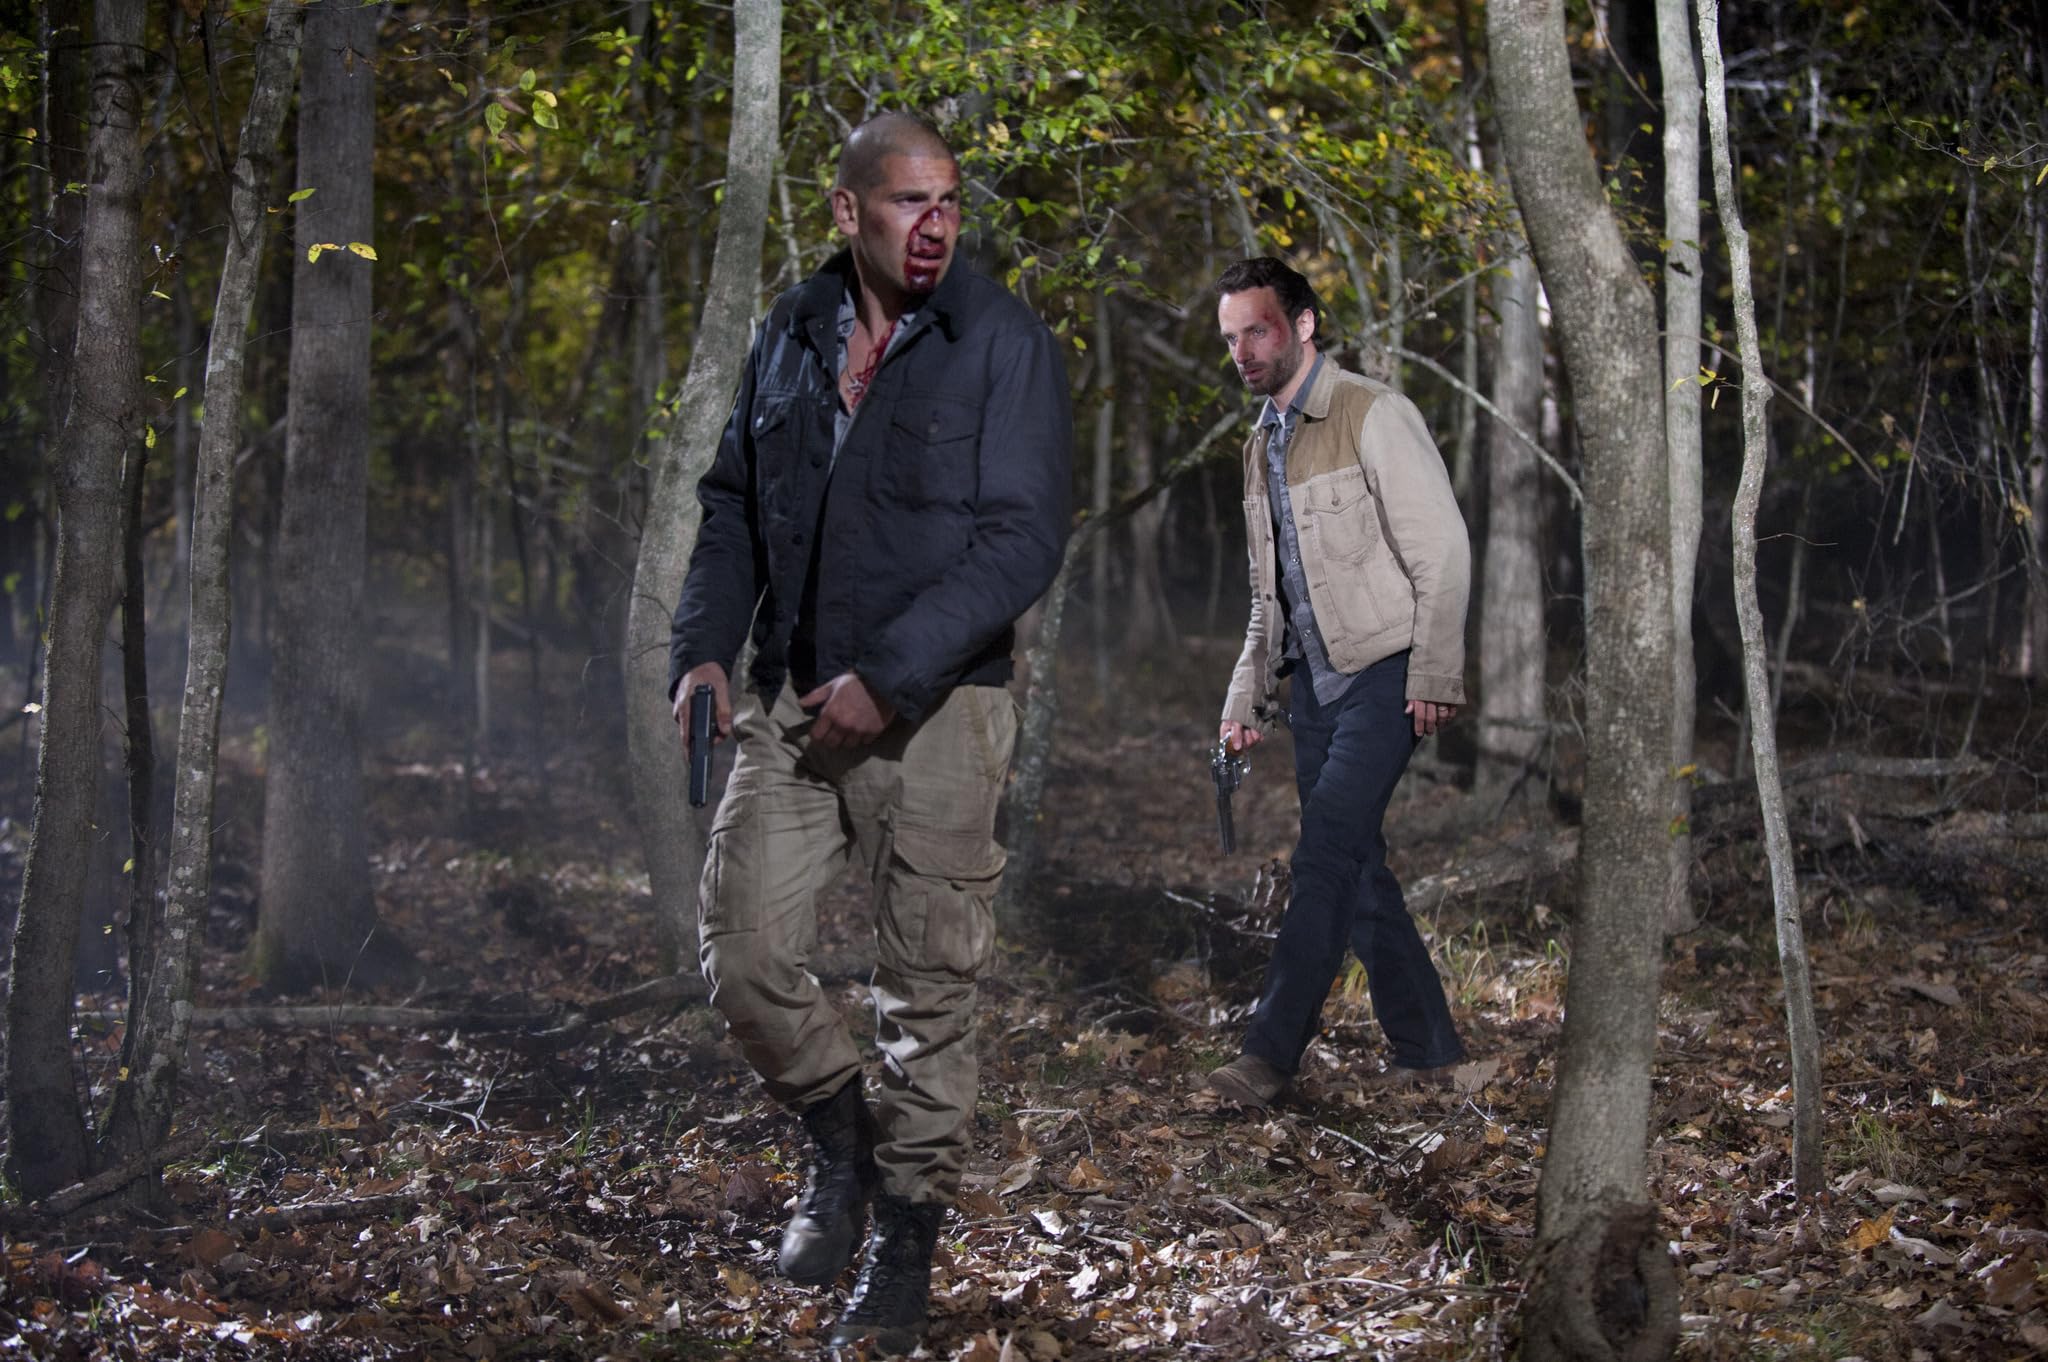 Shane Walsh (Jon Bernthal) and Rick Grimes (Andrew Lincoln) walk through the woods at night, guns in hand, in a still from The Walking Dead season 2 episode “Better Angels”